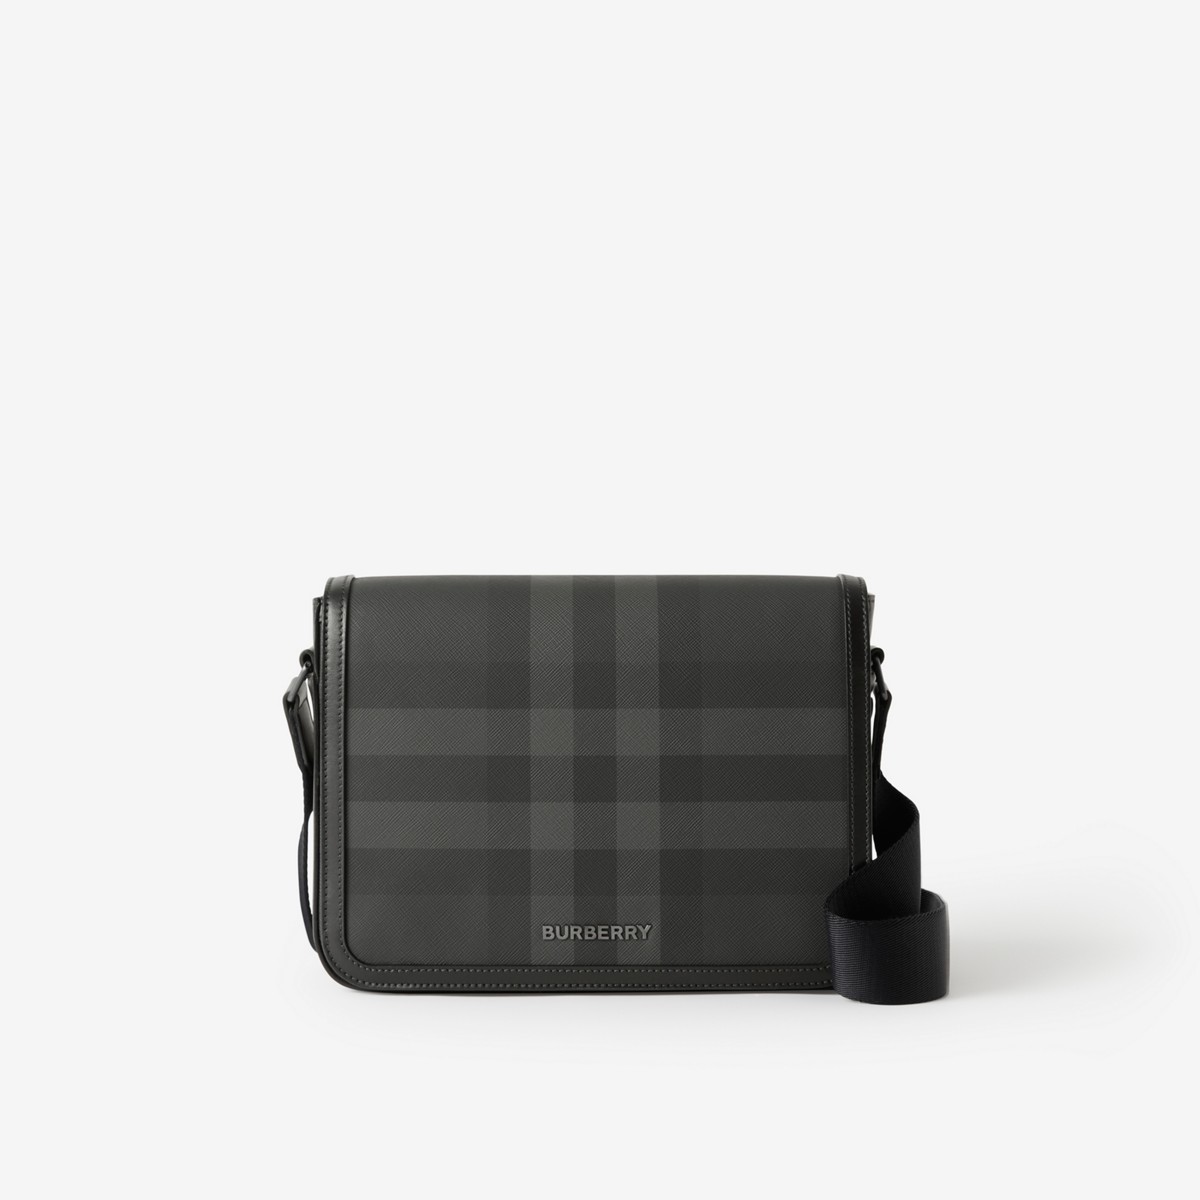 Burberry Small Alfred Messenger Bag In Charcoal